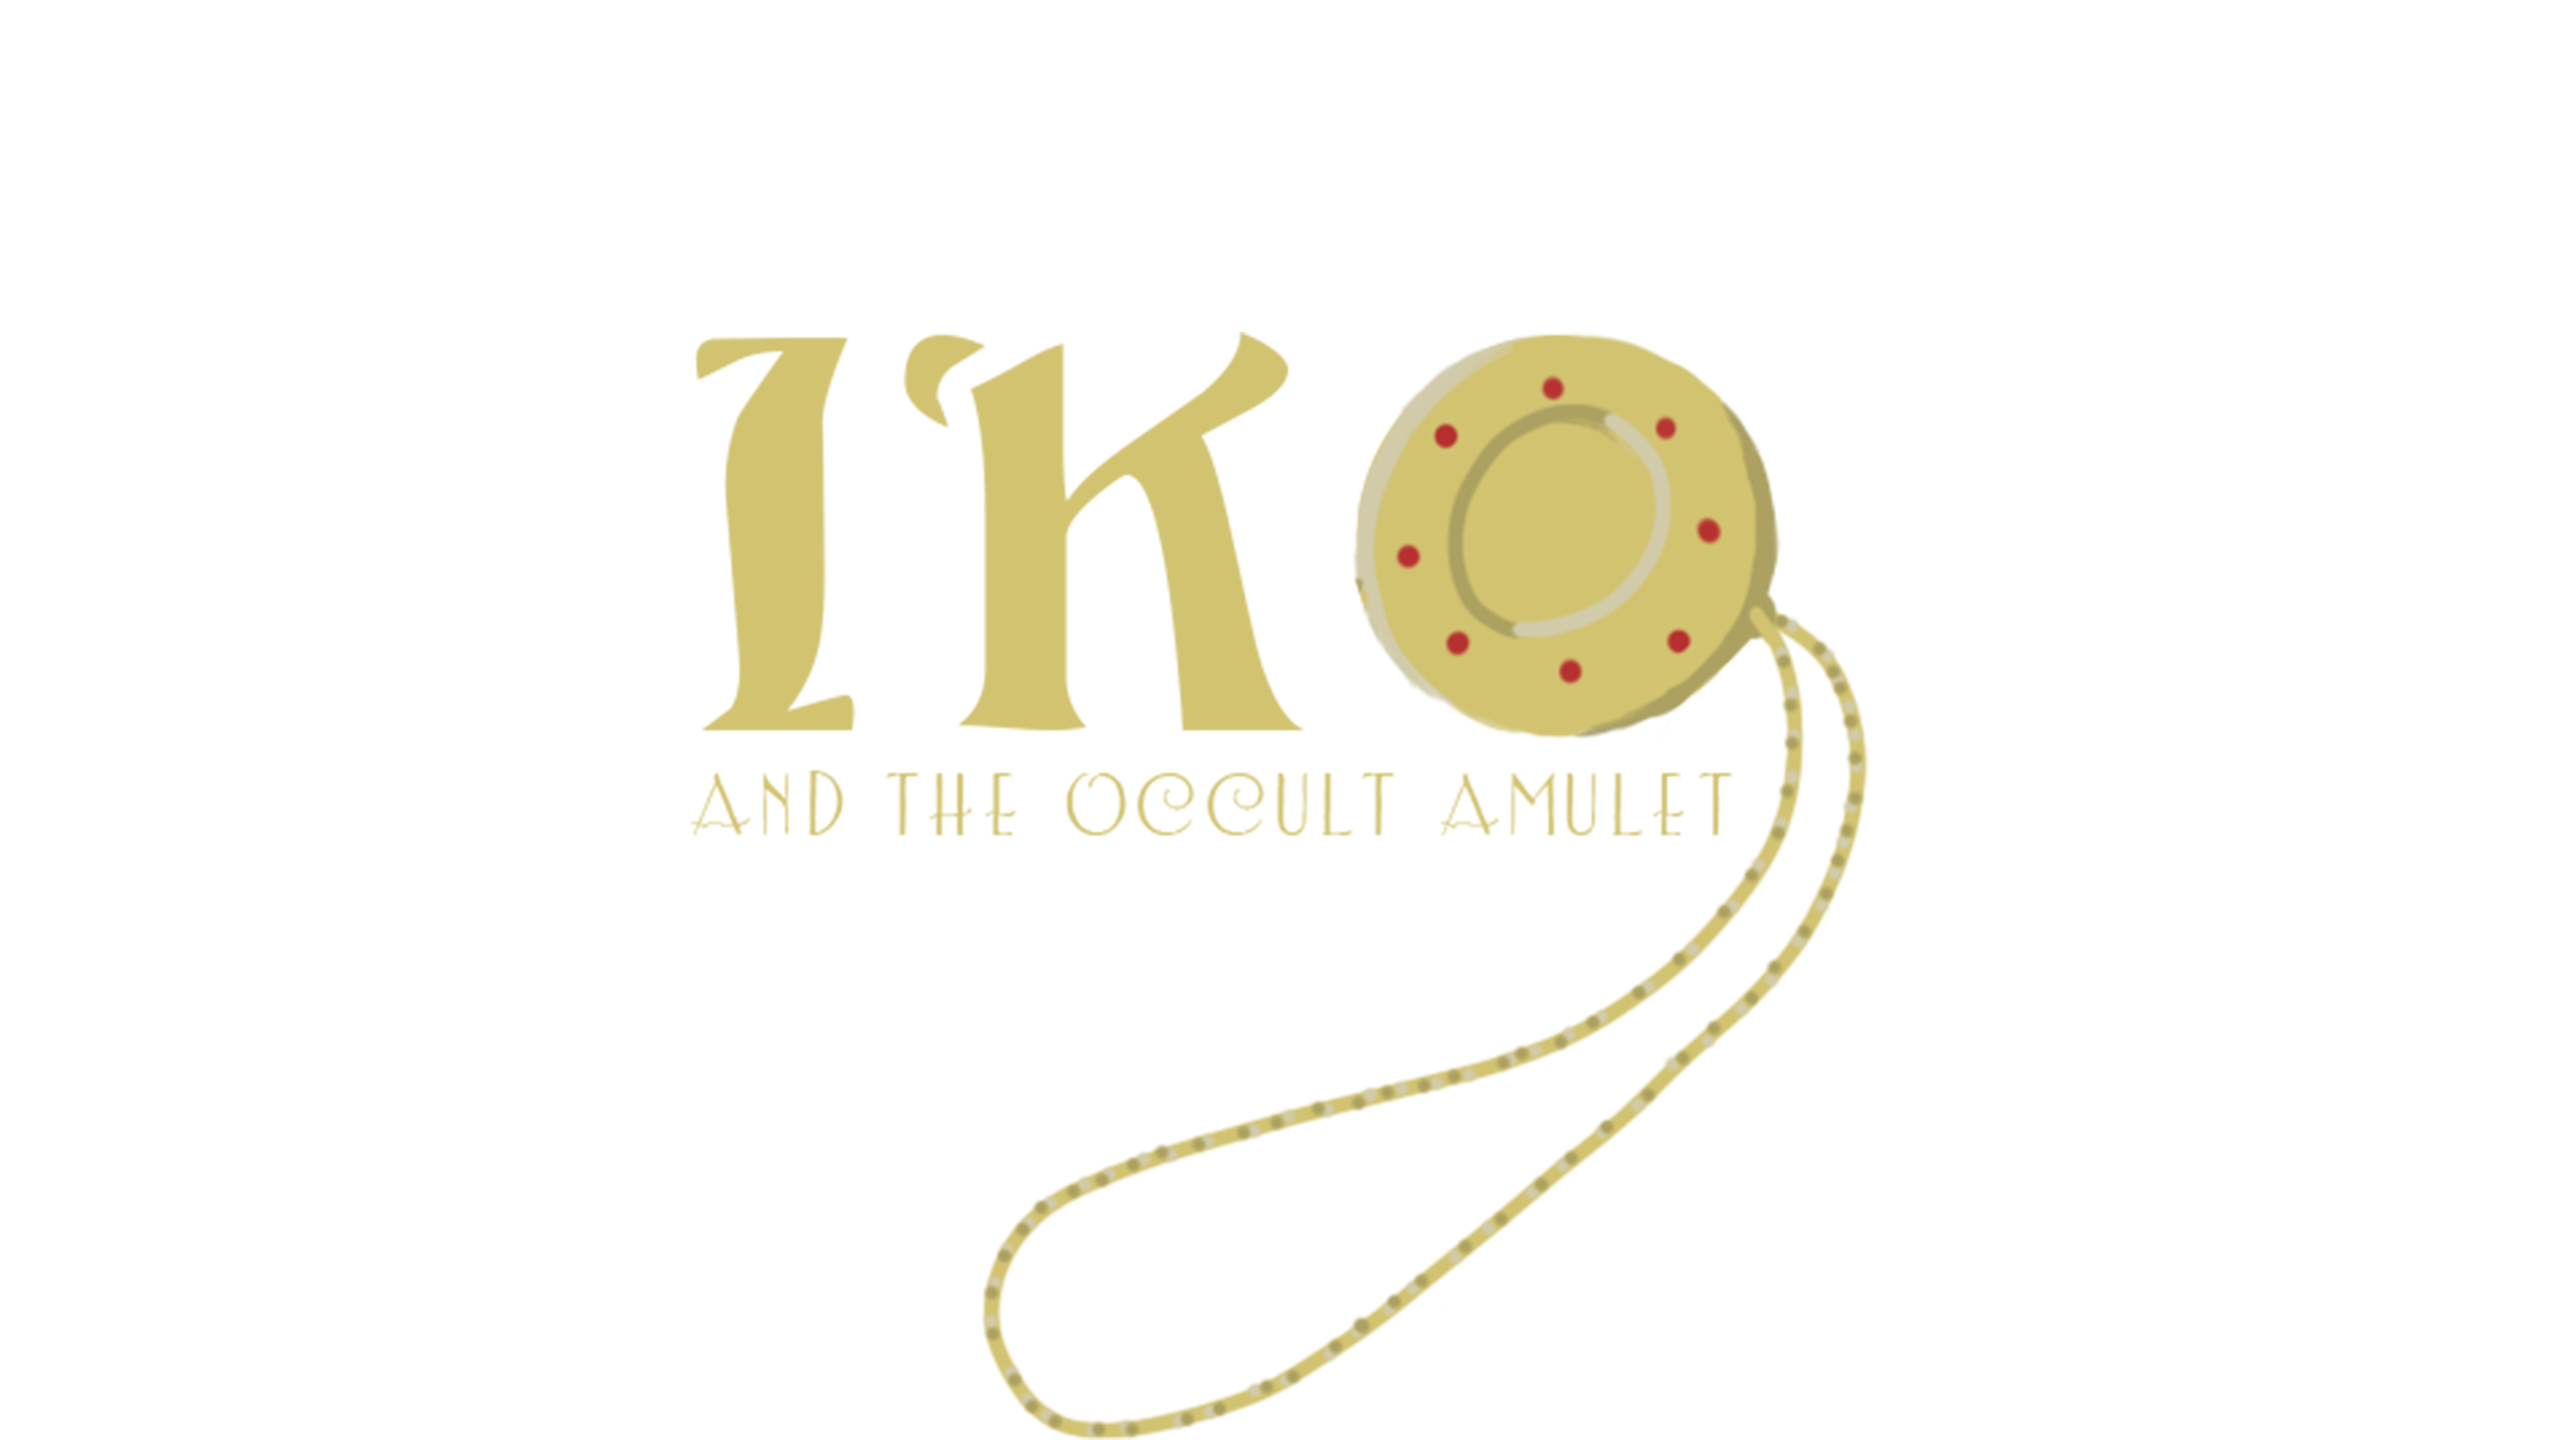 Iko and the occult amulet